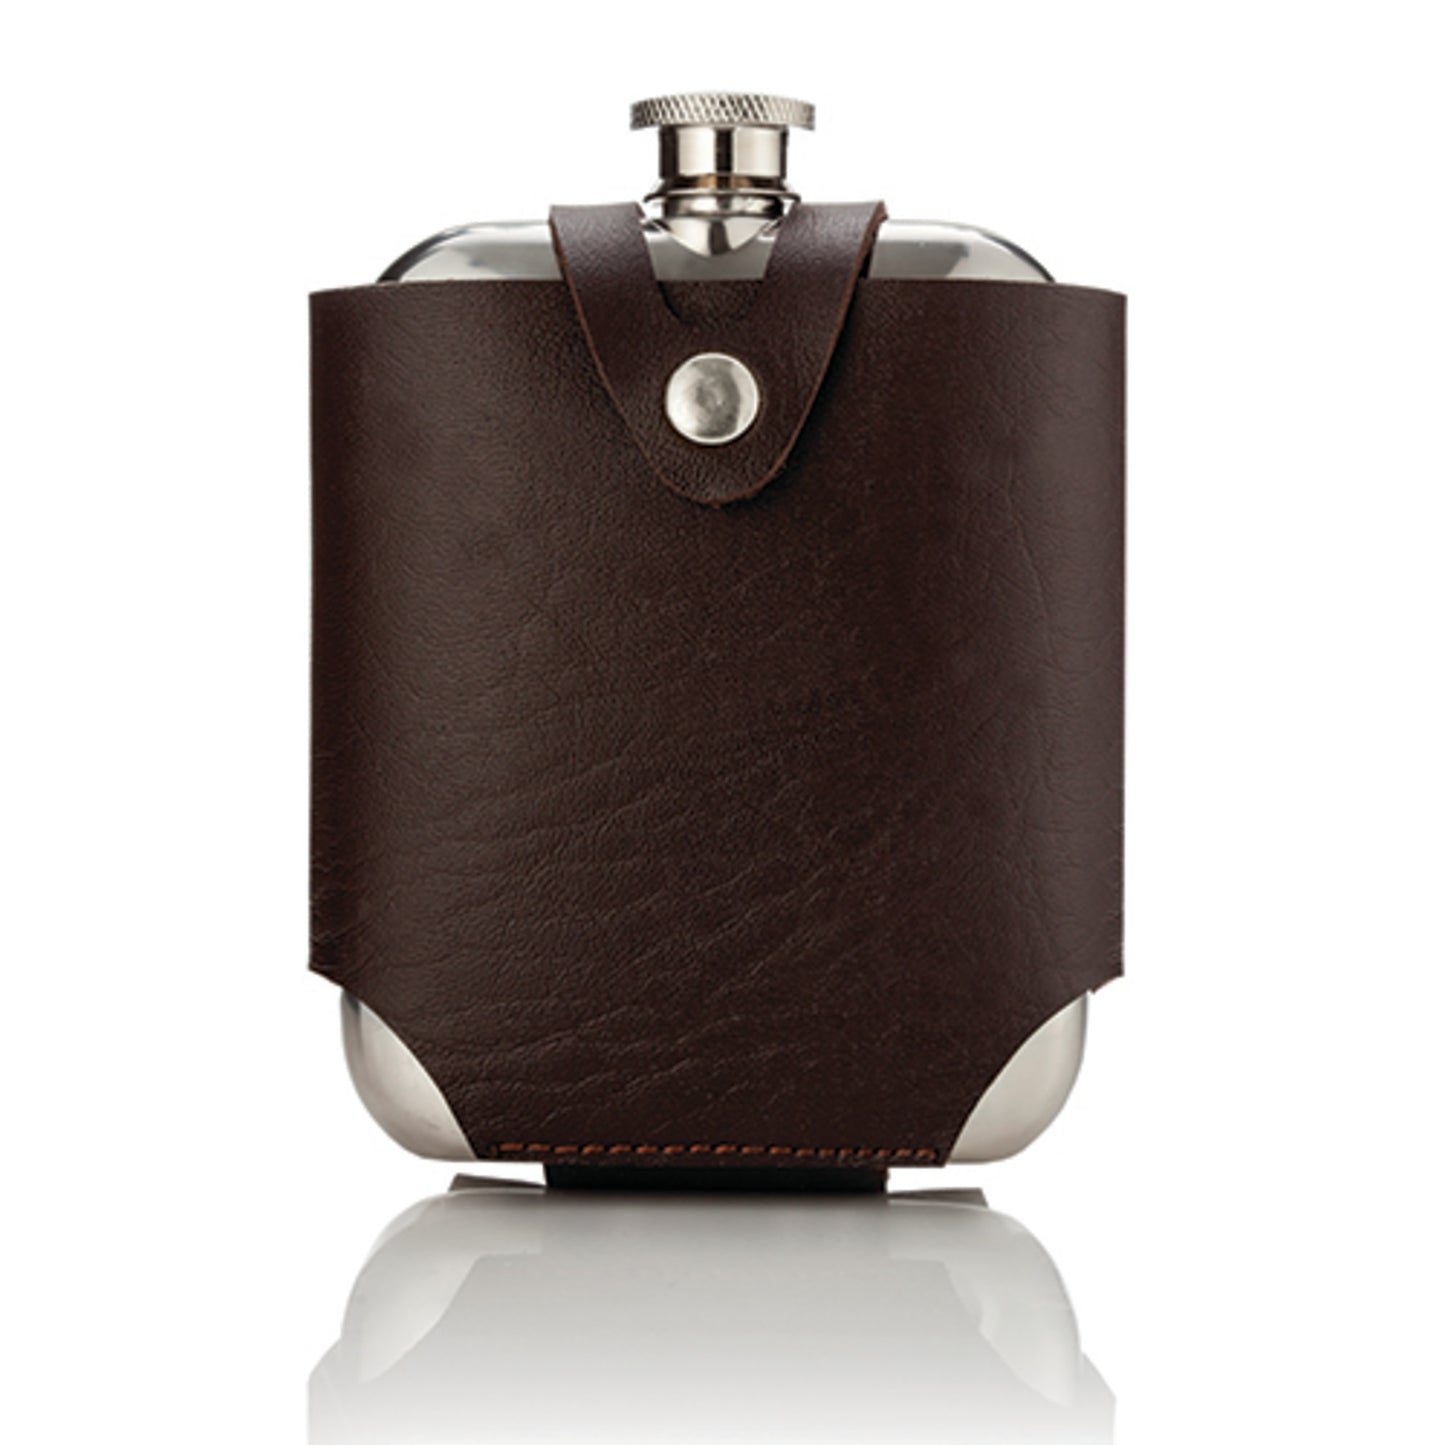 Stainless Steel Flask and Traveling Case by Viski®-0